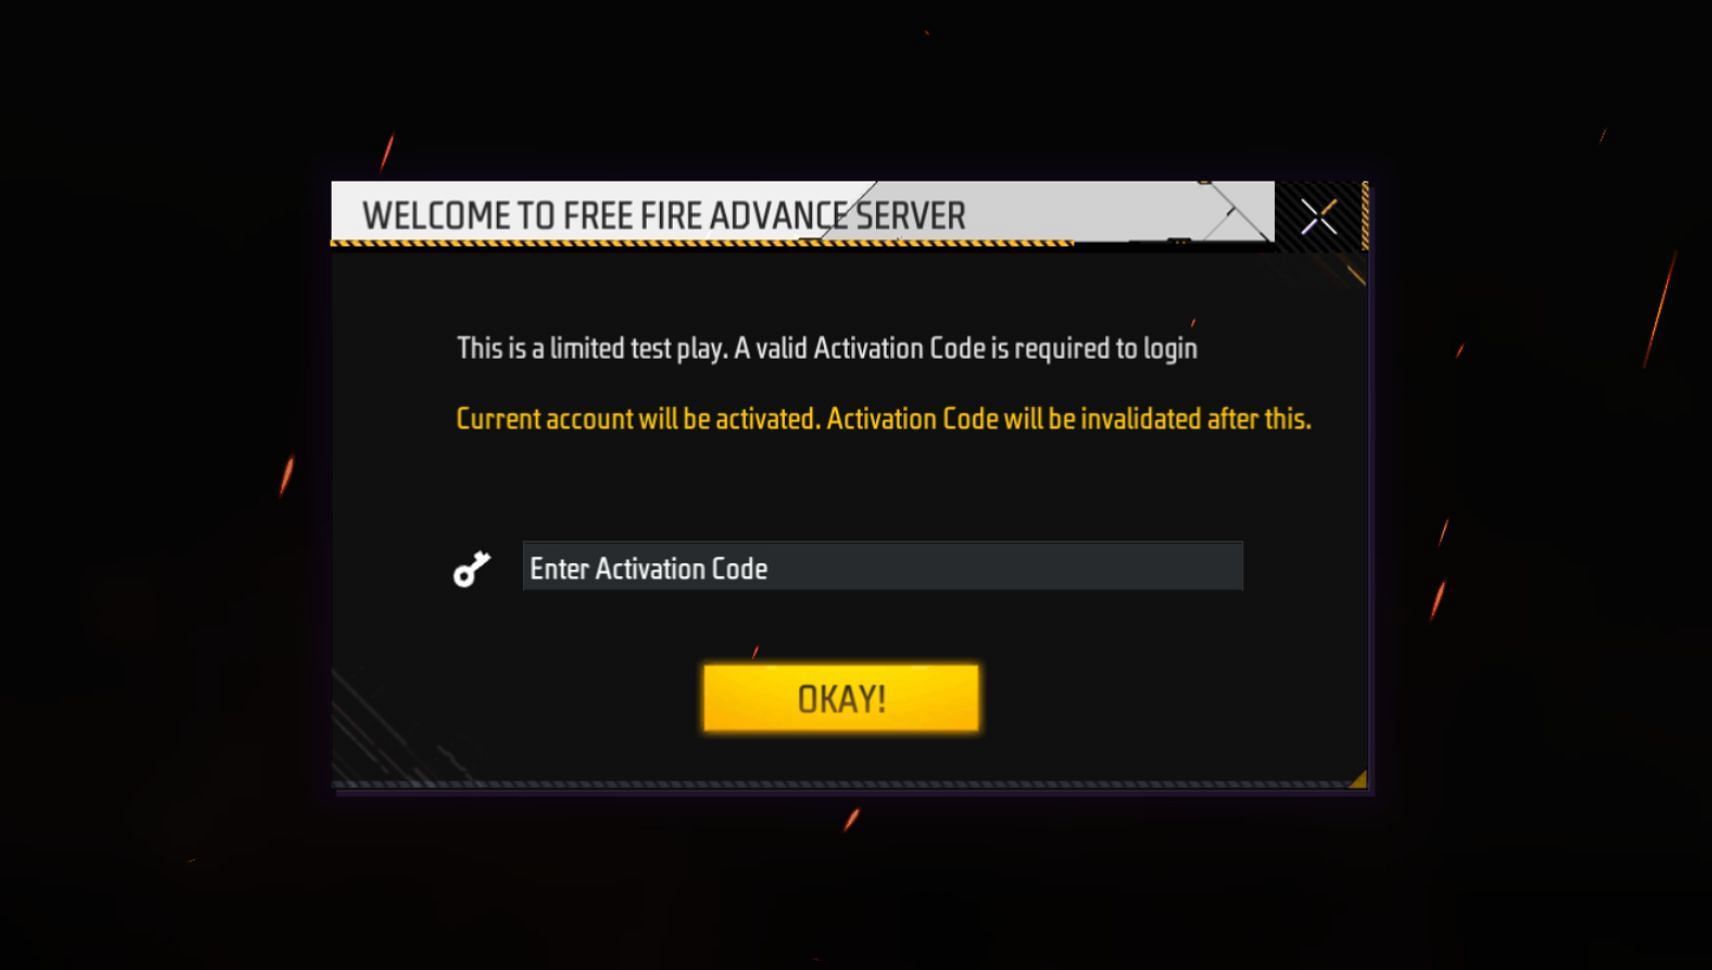 The activation code is necessary for the Free Fire MAX/Free Fire Advance Server (Image via Garena)